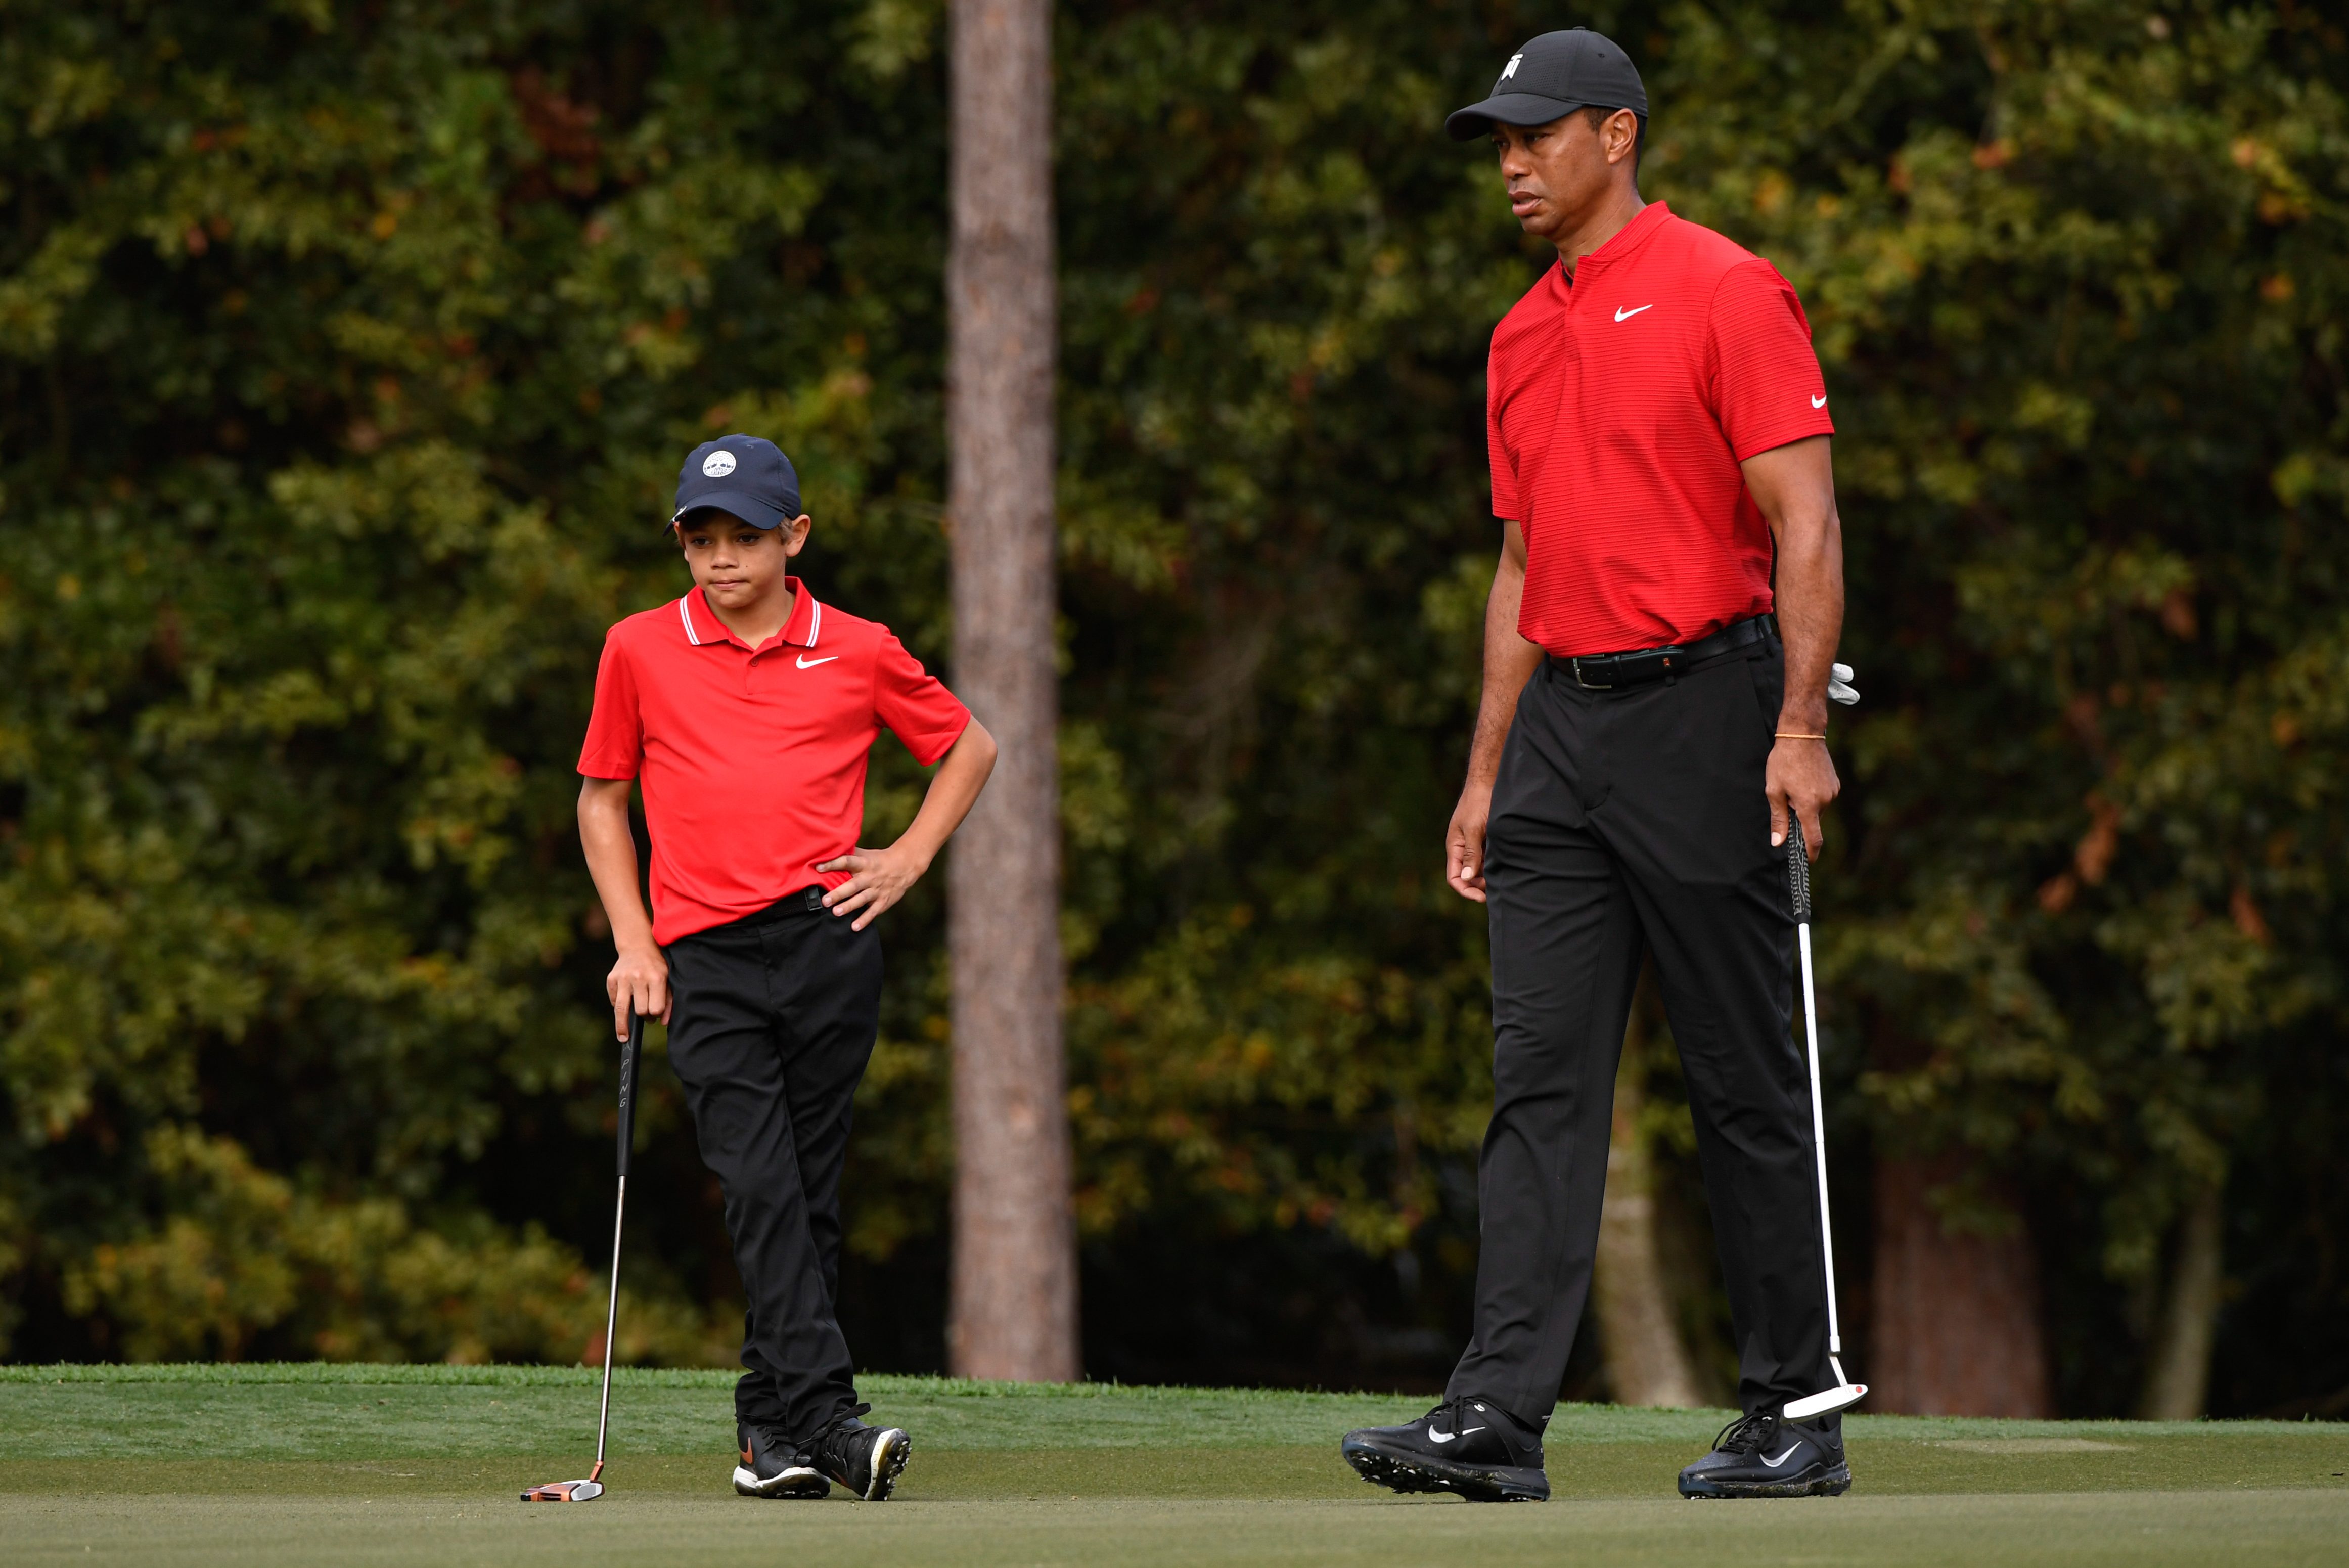 Tiger Woods Returning to Golf Course at PNC Championship